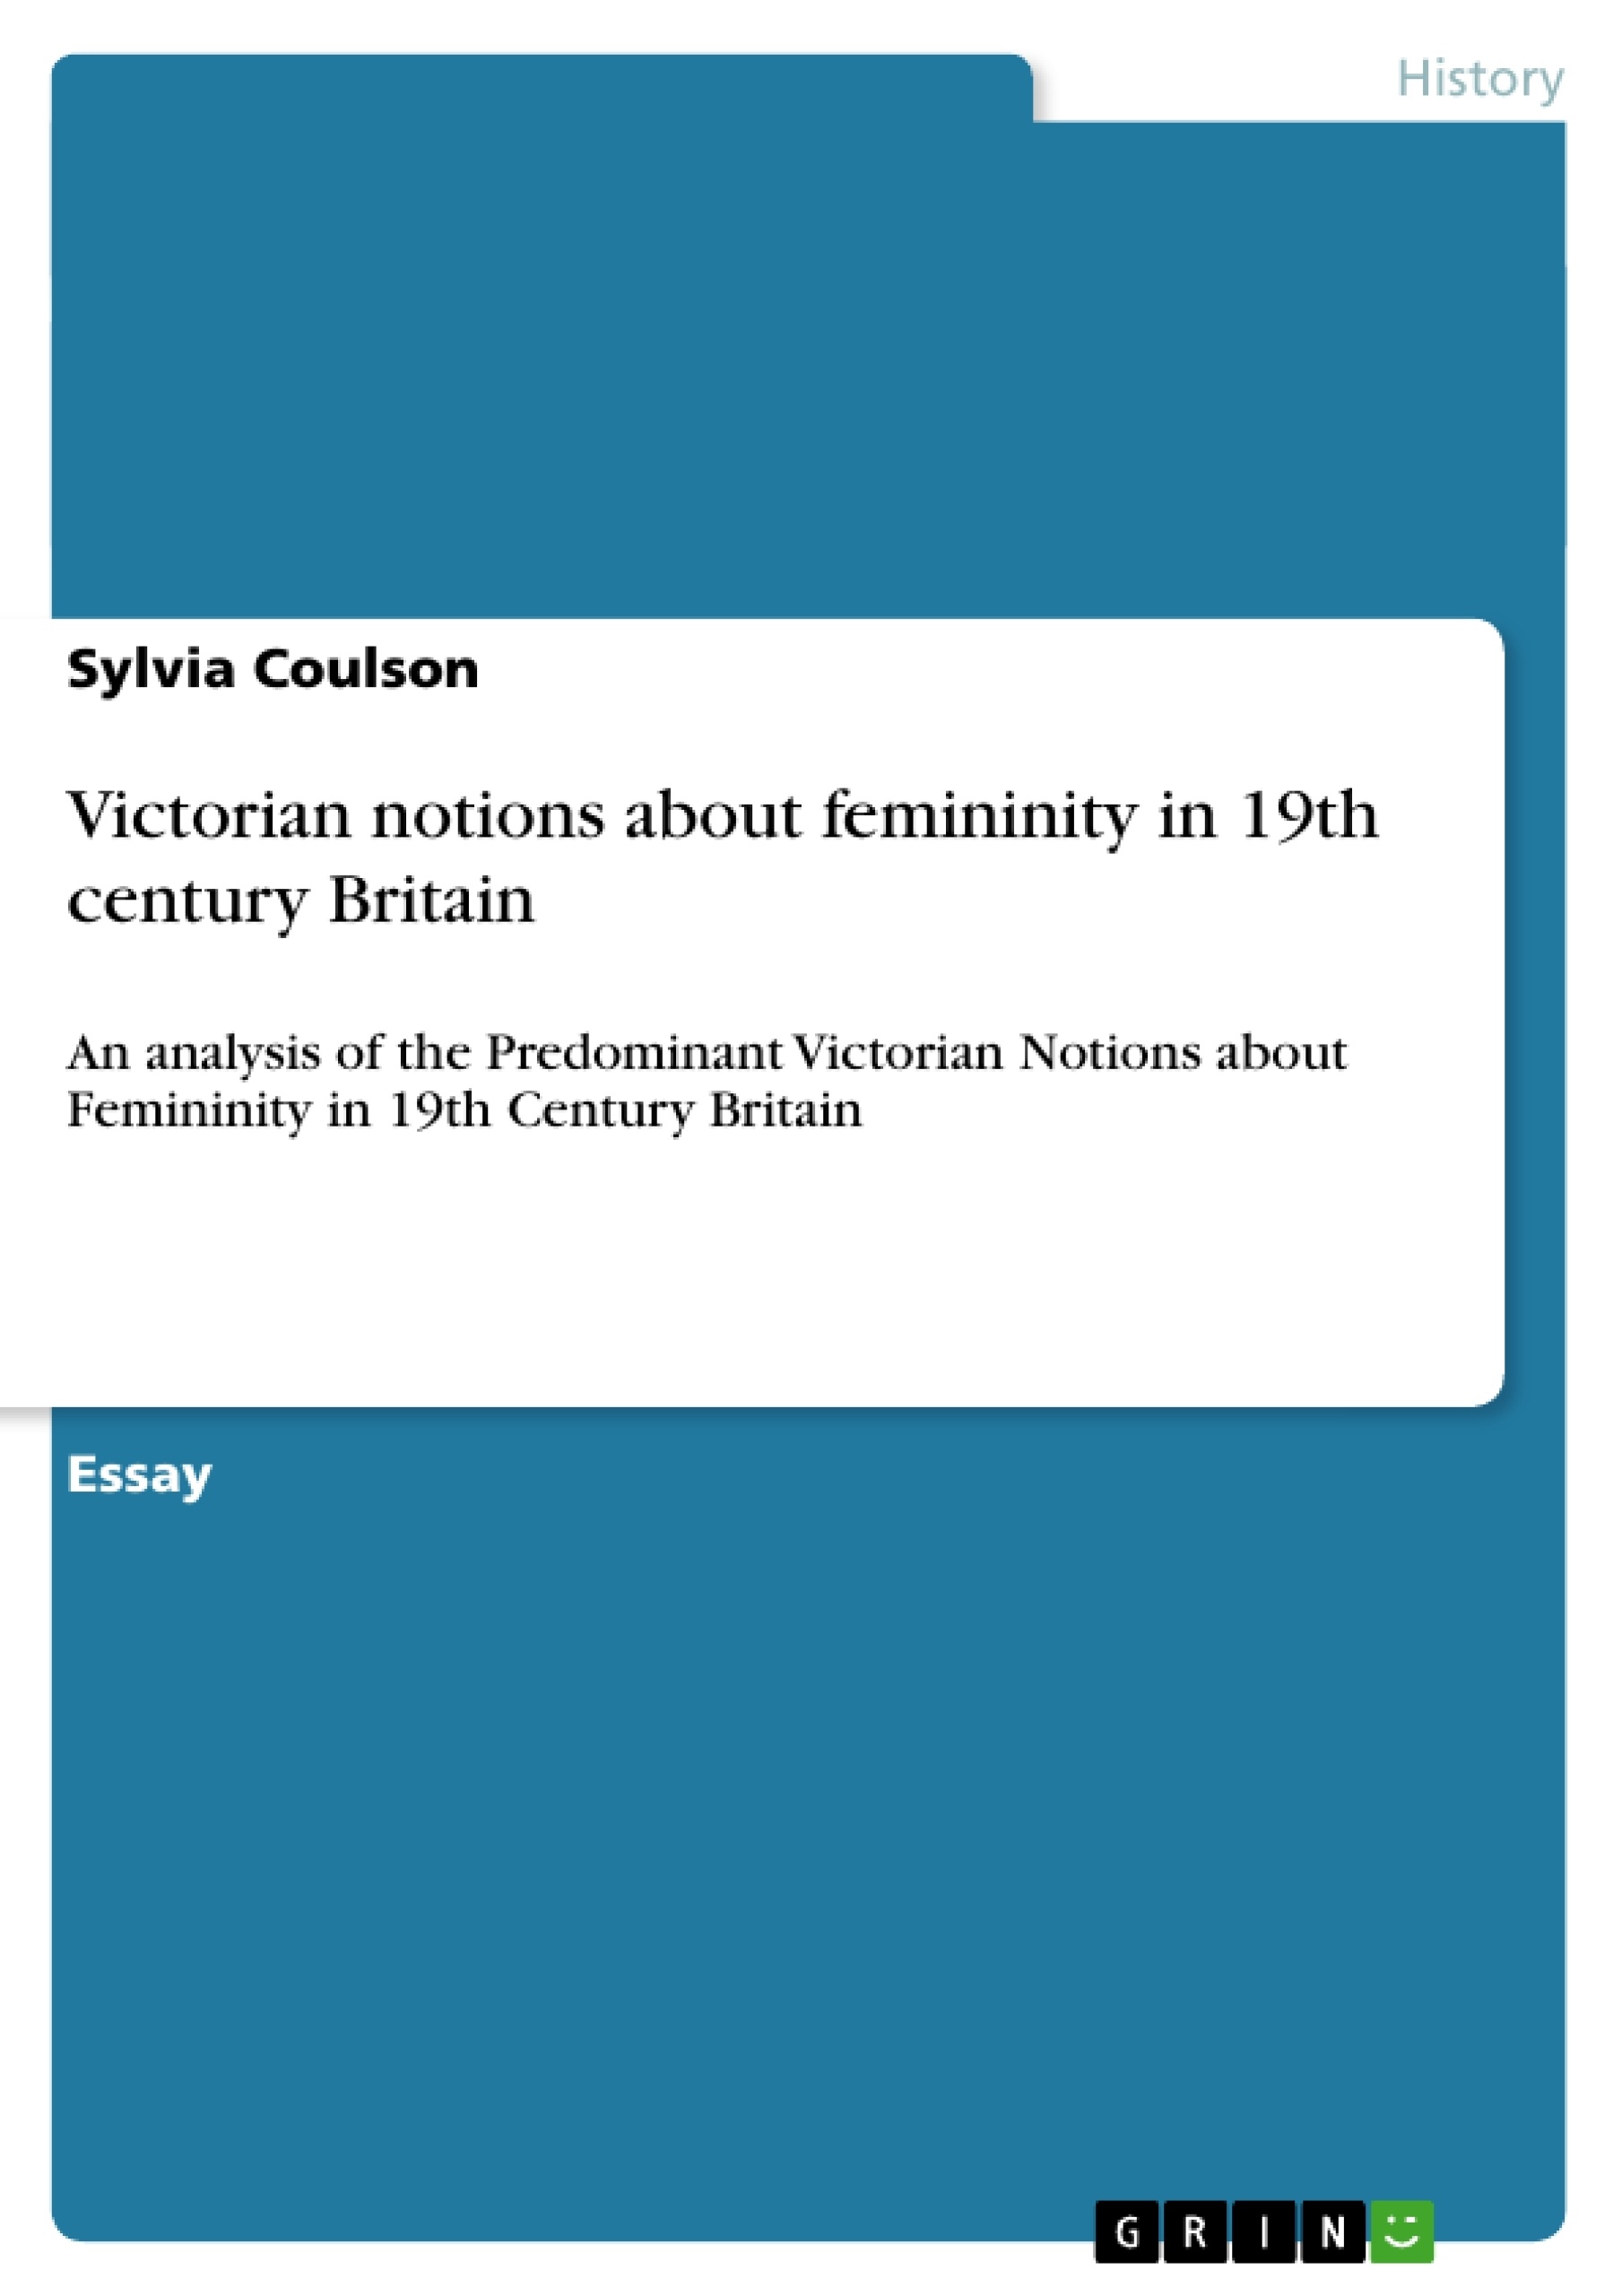 Título: Victorian notions about femininity in 19th century Britain